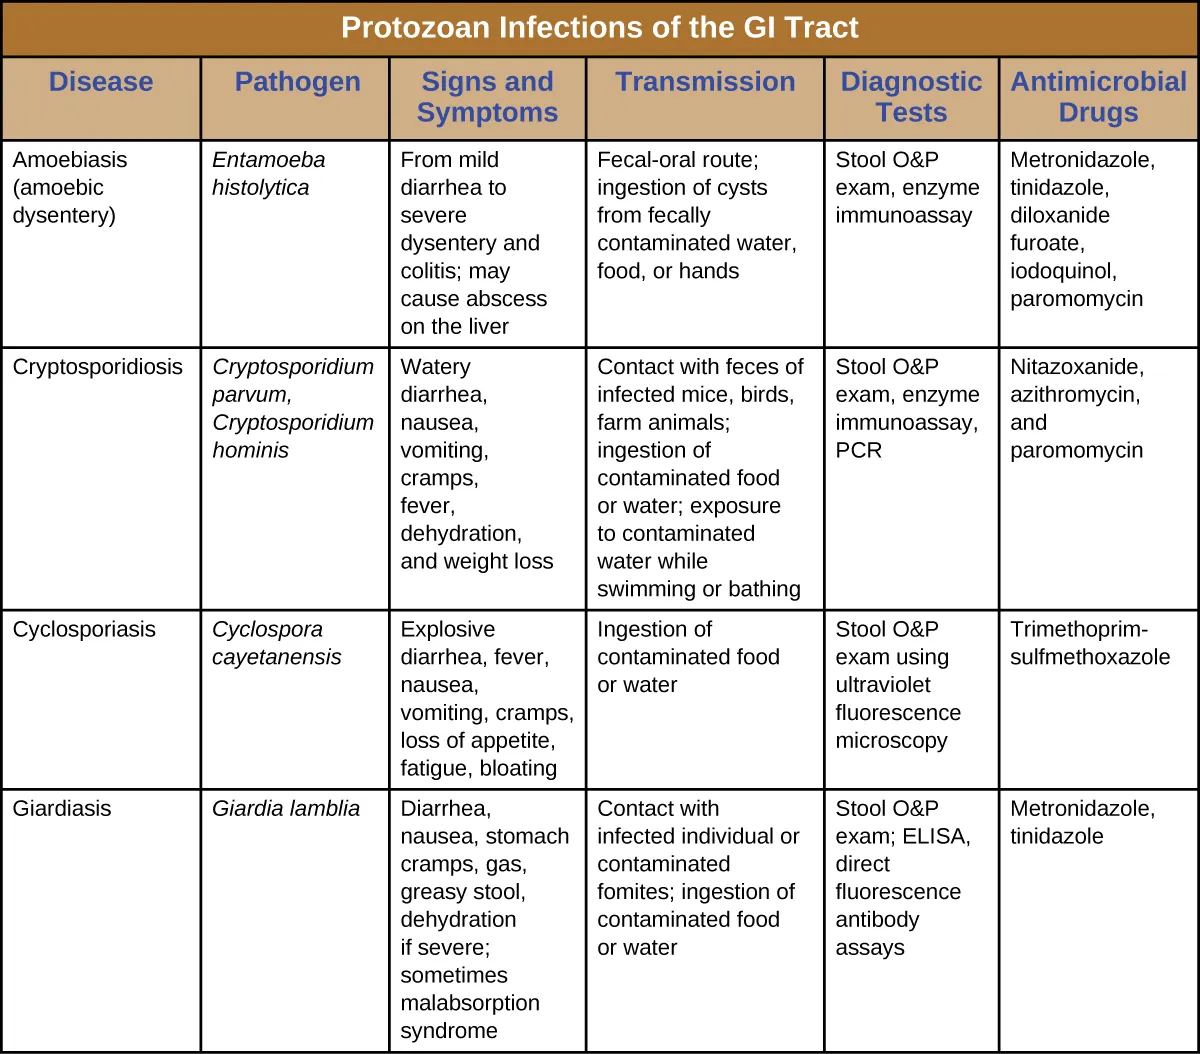 Table titled: Protozoan Infections of the GI Tract. Columns: Disease, Pathogen, Signs and Symptoms, Transmission, Diagnostic Tests, Antimicrobial Drugs. Amoebiasis (amoebic dysentery); Entamoeba histolytica; From mild diarrhea to severe dysentery and colitis; may cause abscess on the liver; Fecal-oral route; ingestion of cysts from fecally contaminated water, food, or hands Stool O&P exam, enzyme immunoassay; Metronidazole, tinidazole, diloxanide furoate, iodoquinol, paromomycin. Cryptosporidiosis; Cryptosporidium parvum, Cryptosporidium hominis; Watery diarrhea, nausea, vomiting, cramps, fever, dehydration, and weight loss; Contact with feces of infected mice, birds, farm animals; ingestion of contaminated food or water; exposure to contaminated water while swimming or bathing ; Stool O&P exam, enzyme immunoassay, PCR; Nitazoxanide, azithromycin, and paromomycin. Cyclosporiasis; Cyclospora cayetanensis; Explosive diarrhea, fever, nausea, vomiting, cramps, loss of appetite, fatigue, bloating; Ingestion of contaminated food or water; Stool O&P exam using ultraviolet fluorescence microscopy; Trimethoprim-sulfmethoxazole. Giardiasis; Giardia lamblia; Diarrhea, nausea, stomach cramps, gas, greasy stool, dehydration if severe; sometimes malabsorption syndrome; Contact with infected individual or contaminated fomites; ingestion of contaminated food or water; Stool O&P exam; ELISA, direct fluorescence antibody assays; Metronidazole, tinidazole.